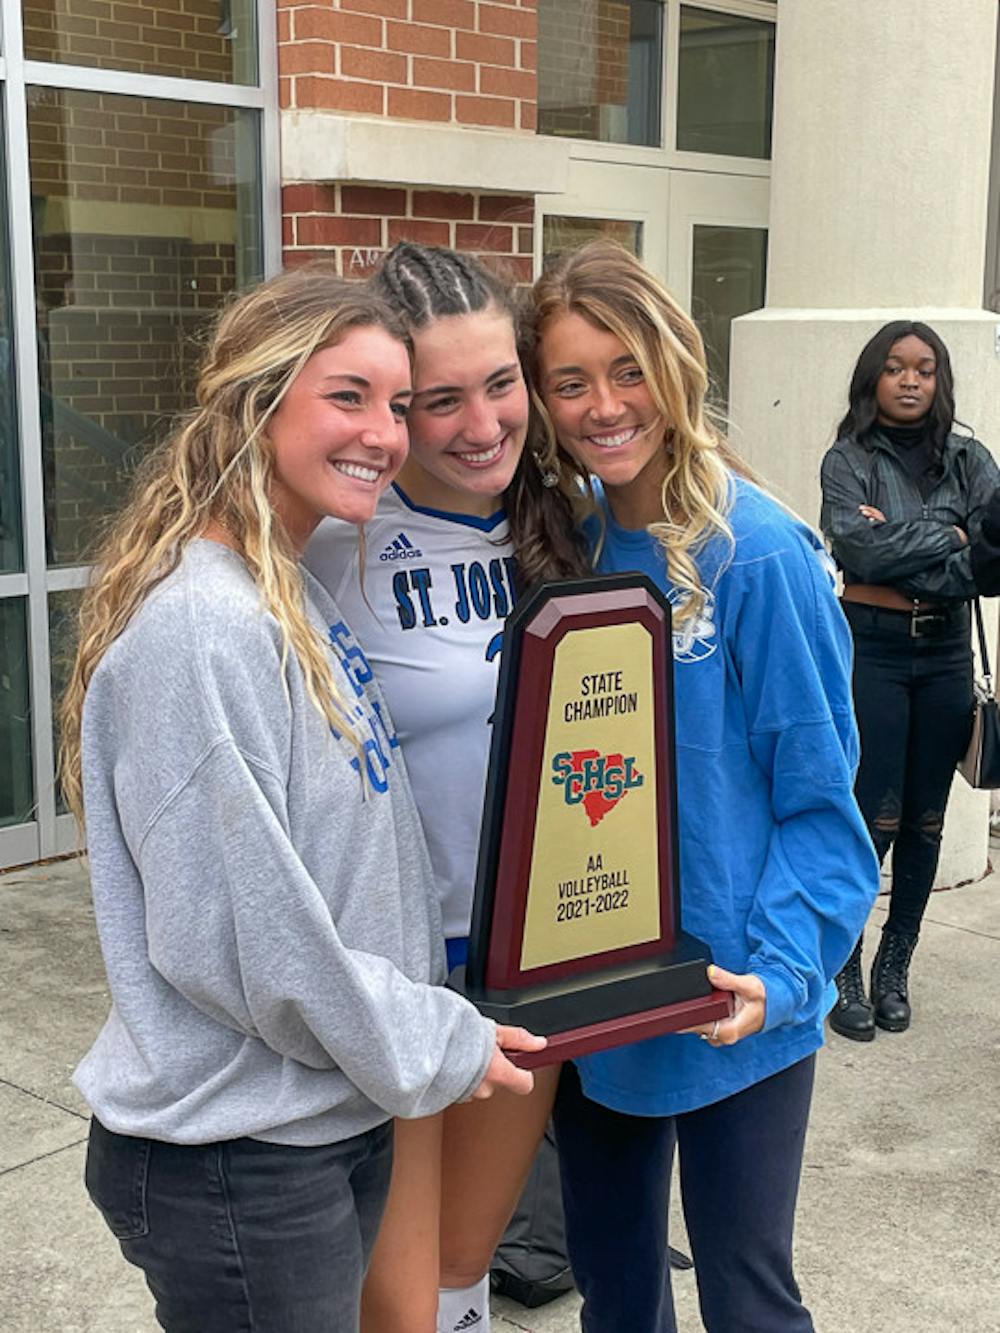 <p>Freshman setter Kimmie Thompson (center) poses with her sisters Kyra Thompson (on left) and Kaely Thompson (on right) after winning the State Championships for St. Joseph's Catholic School. Thompson earned four 2A state titles &nbsp;and helped the team win the state championship in her senior year of high school.</p>